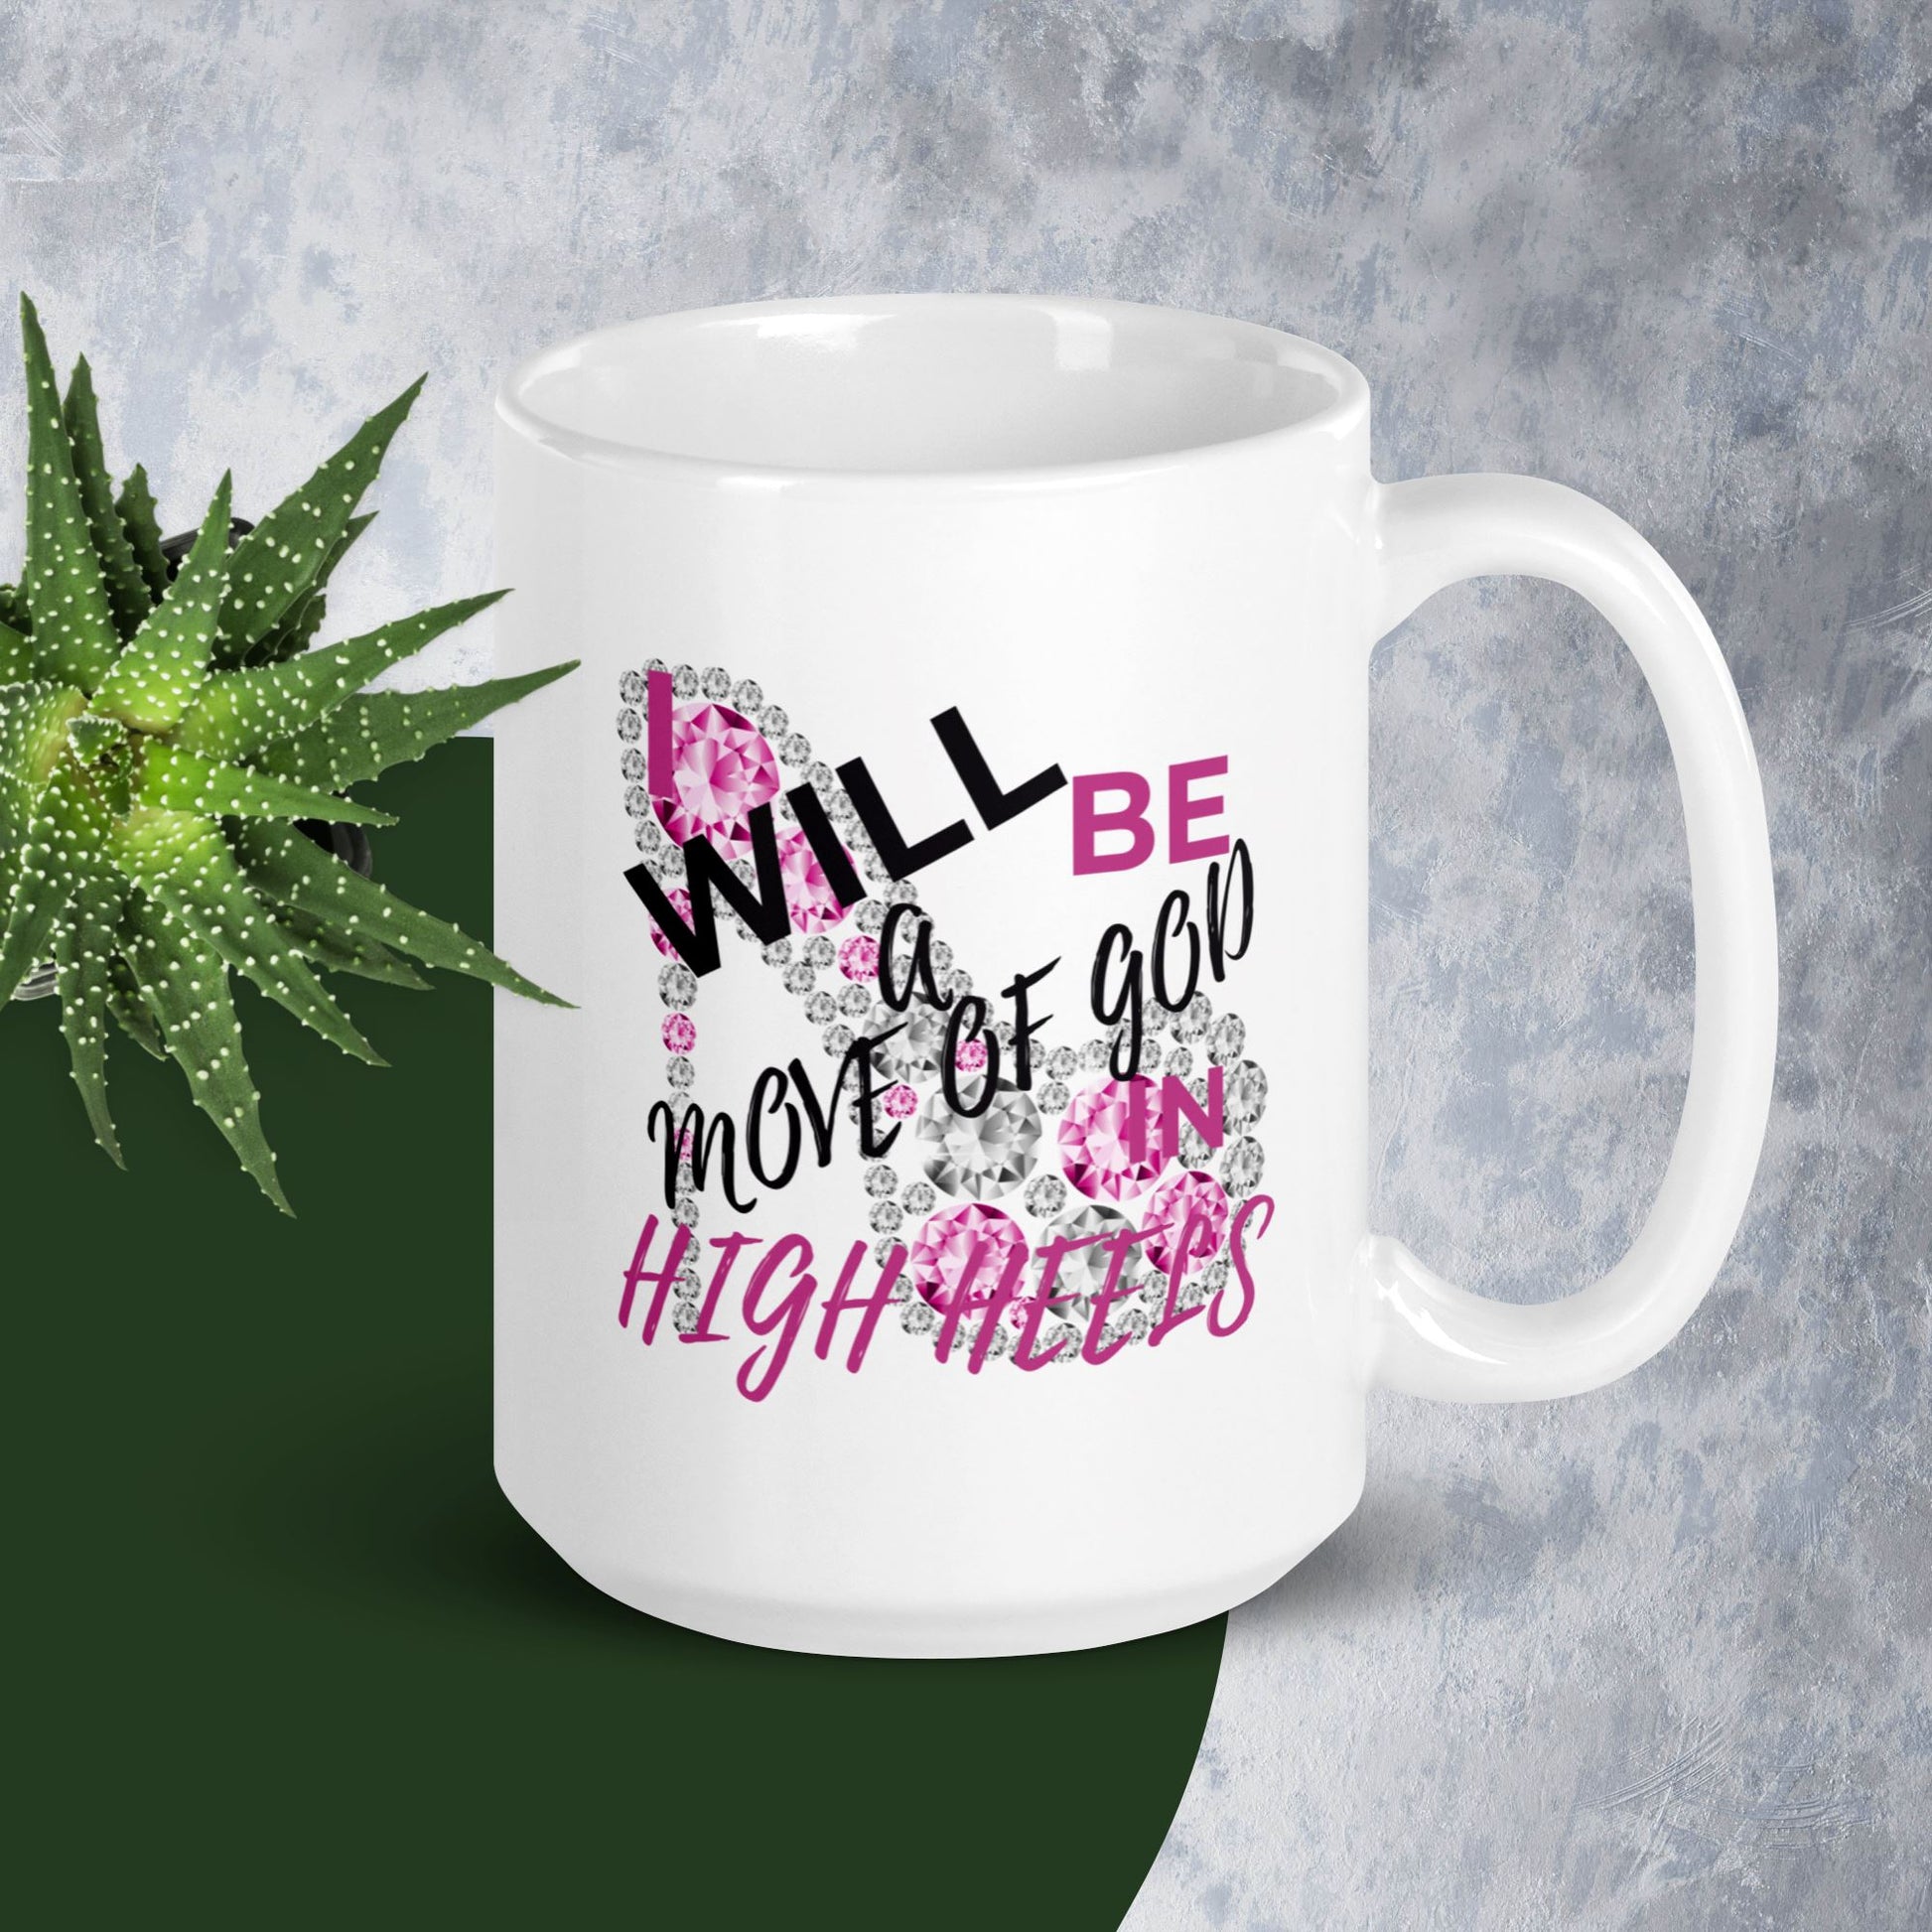 Enjoy your morning coffee or tea with this beautiful, glossy mug featuring the inspiring "I Will Be A Move of God In High Heels" slogan. It's exquisite design and lightweight construction provides comfort and convenience for everyday use.